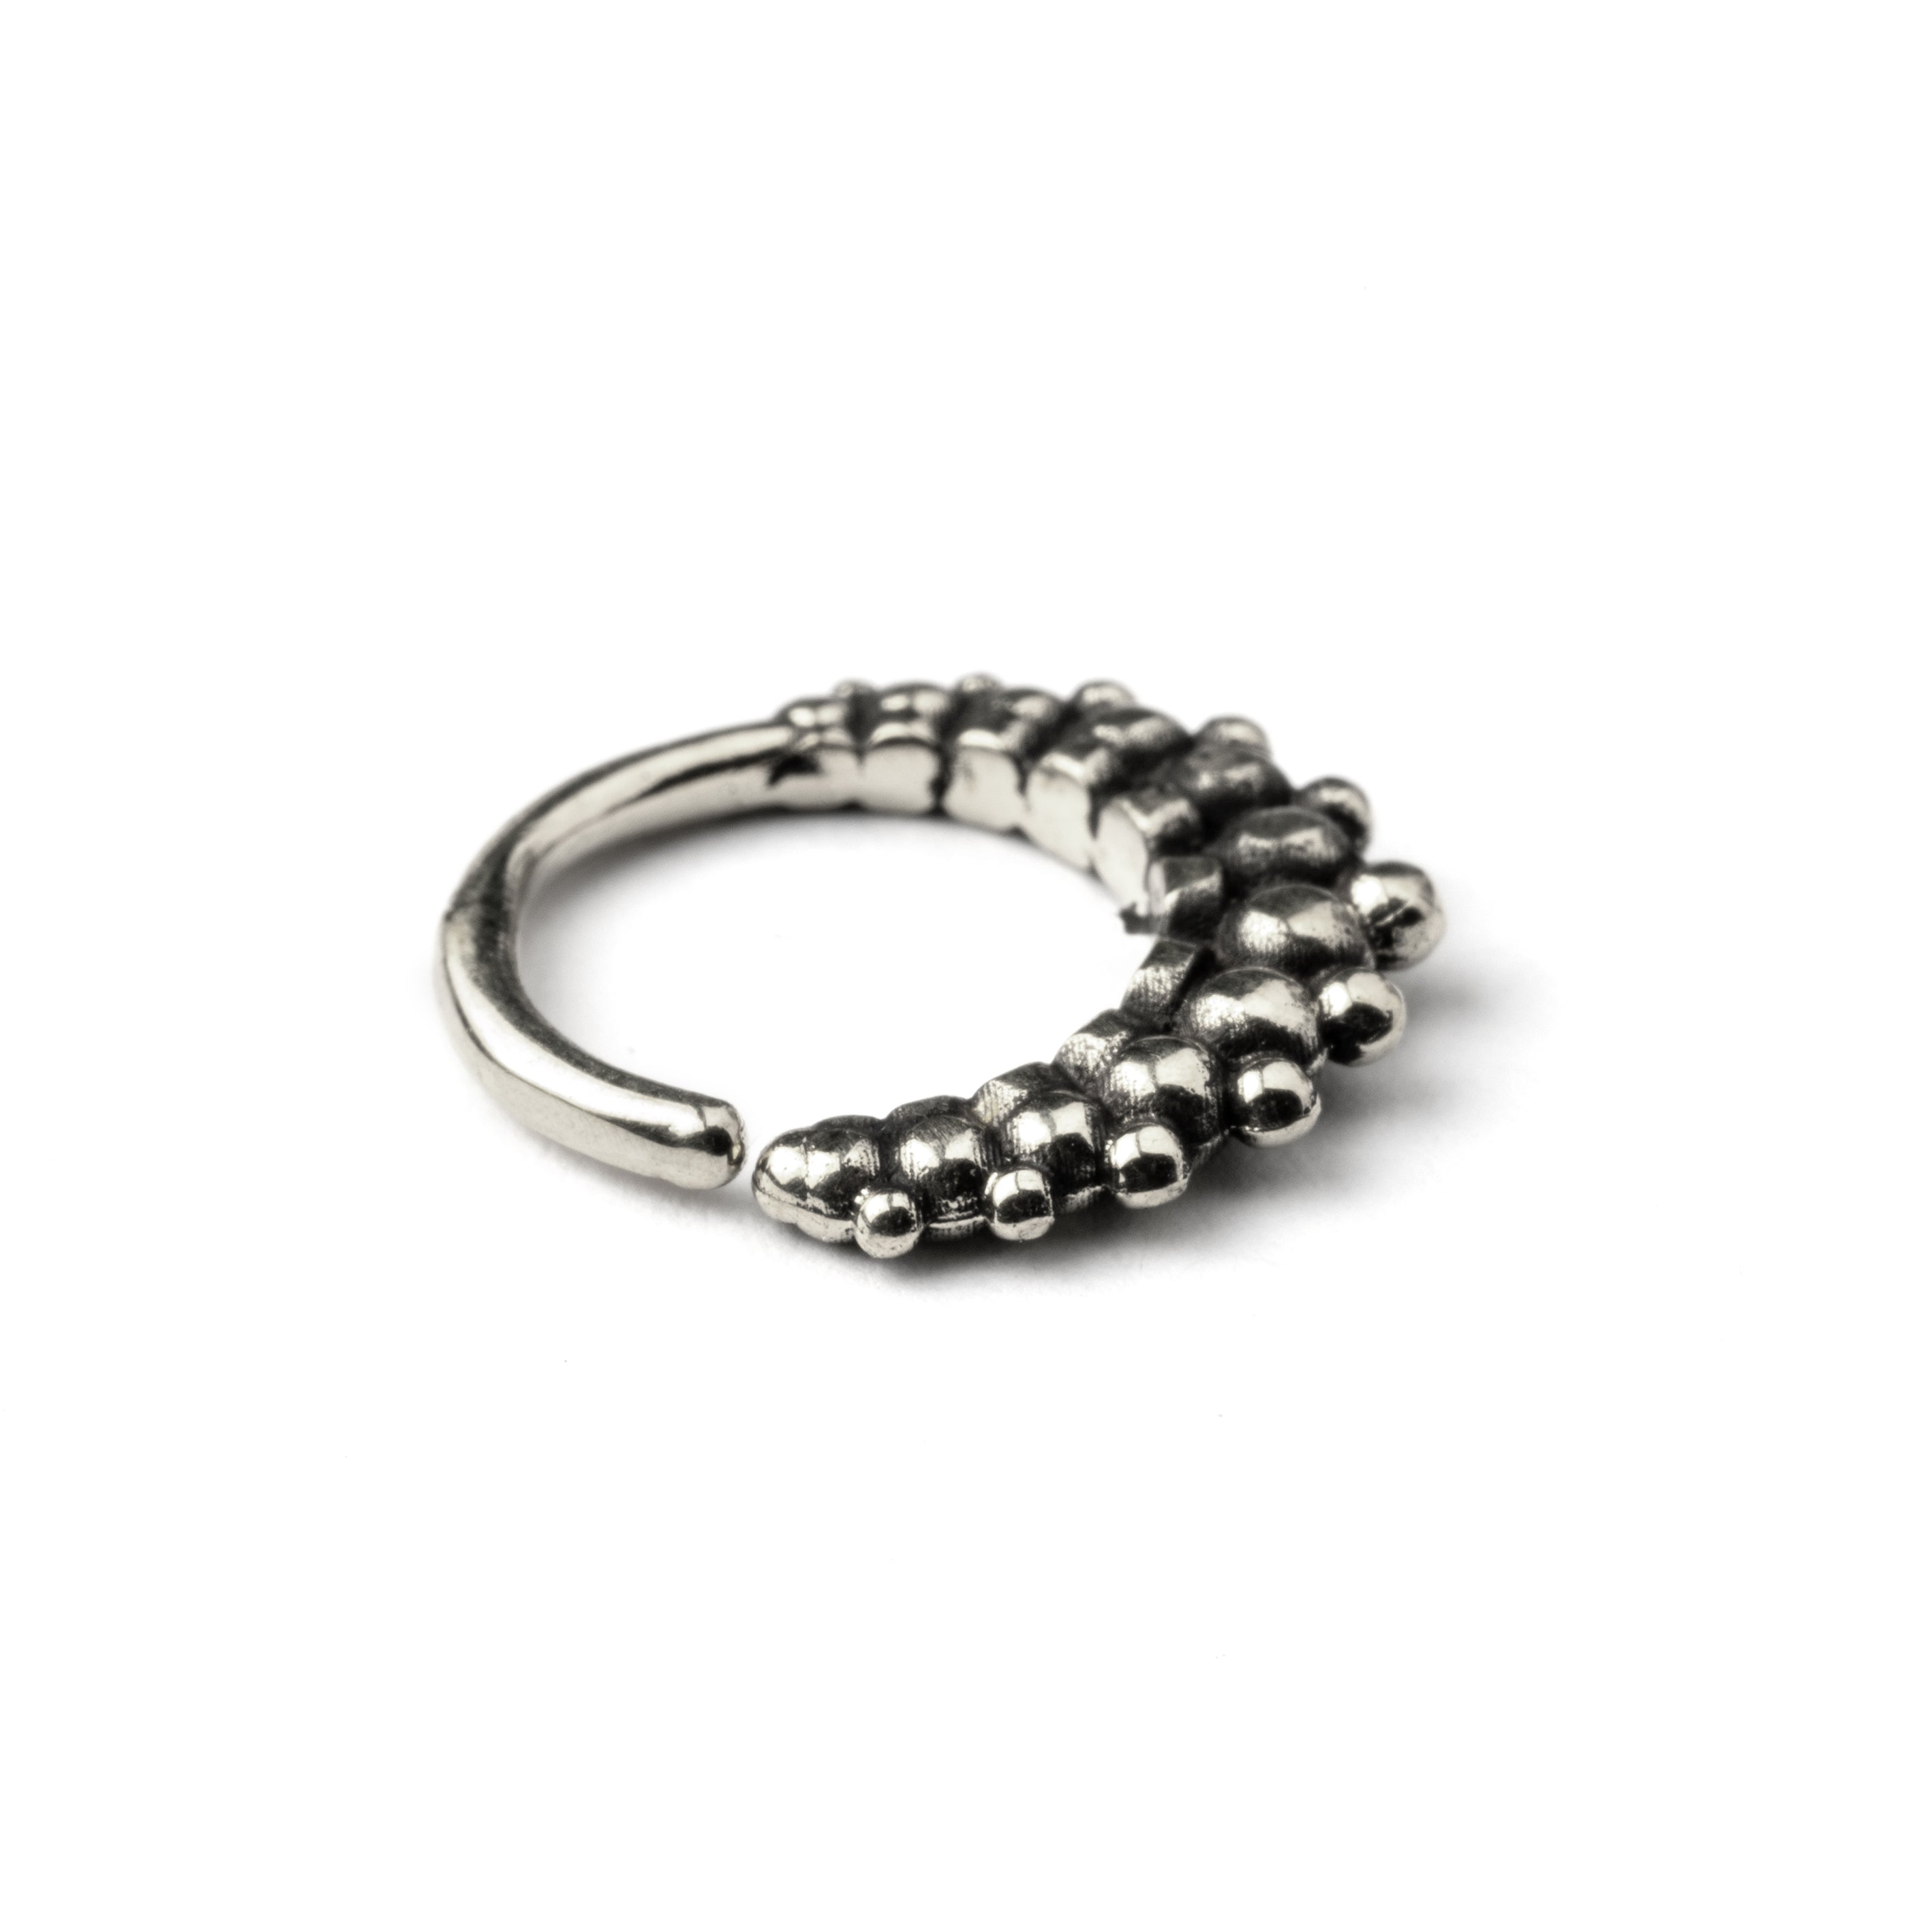 Rajee Silver Septum Ring side view